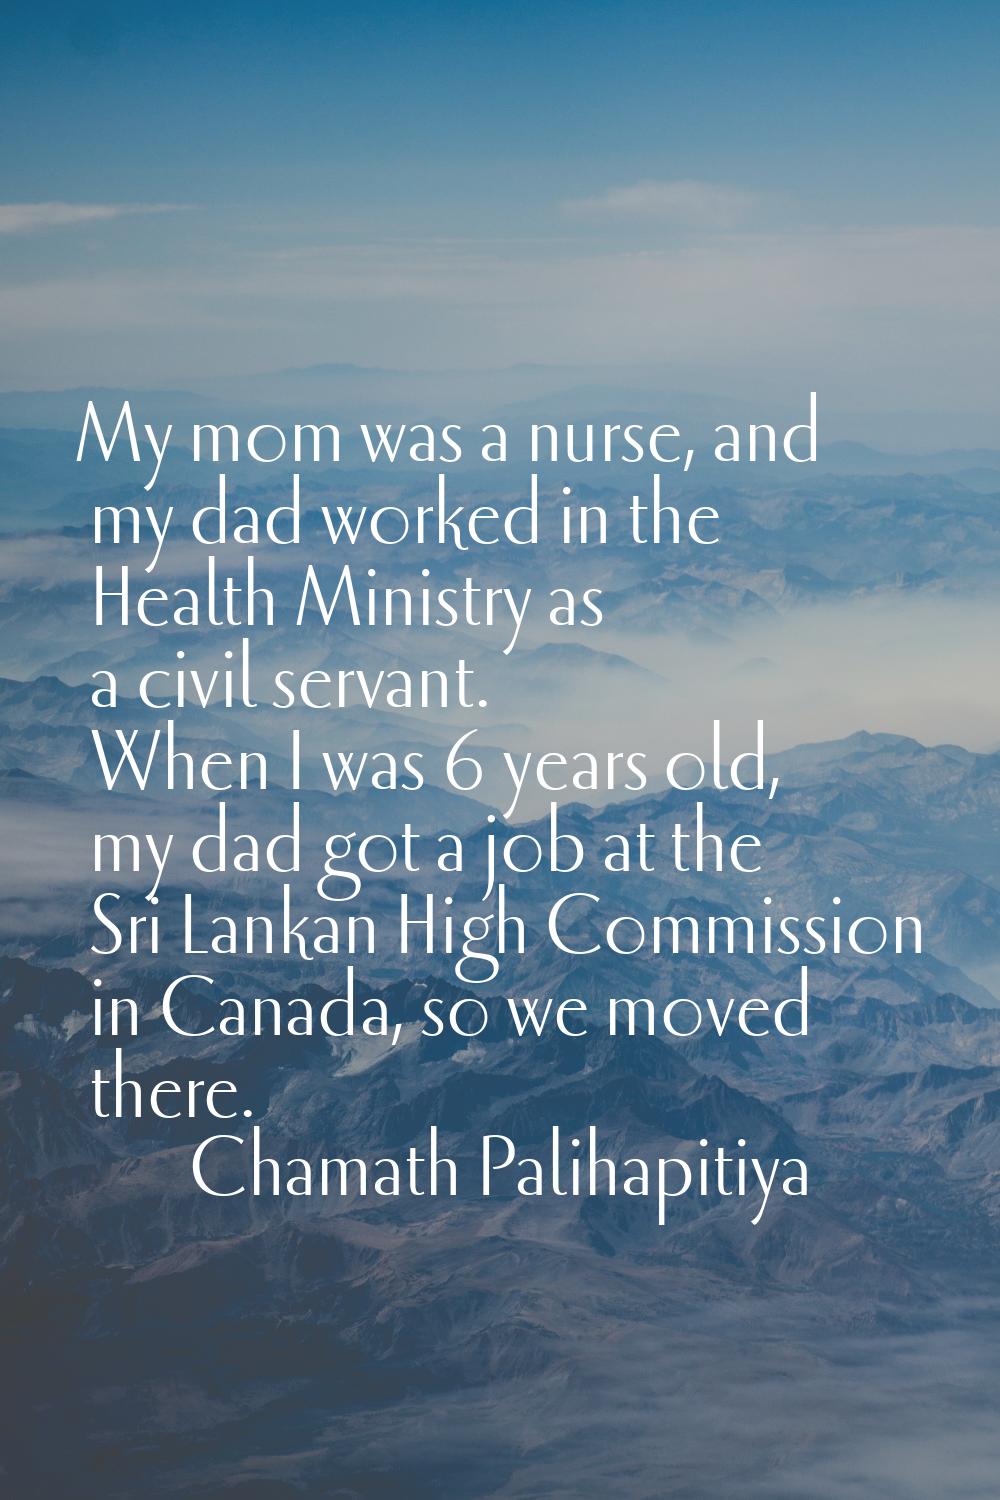 My mom was a nurse, and my dad worked in the Health Ministry as a civil servant. When I was 6 years